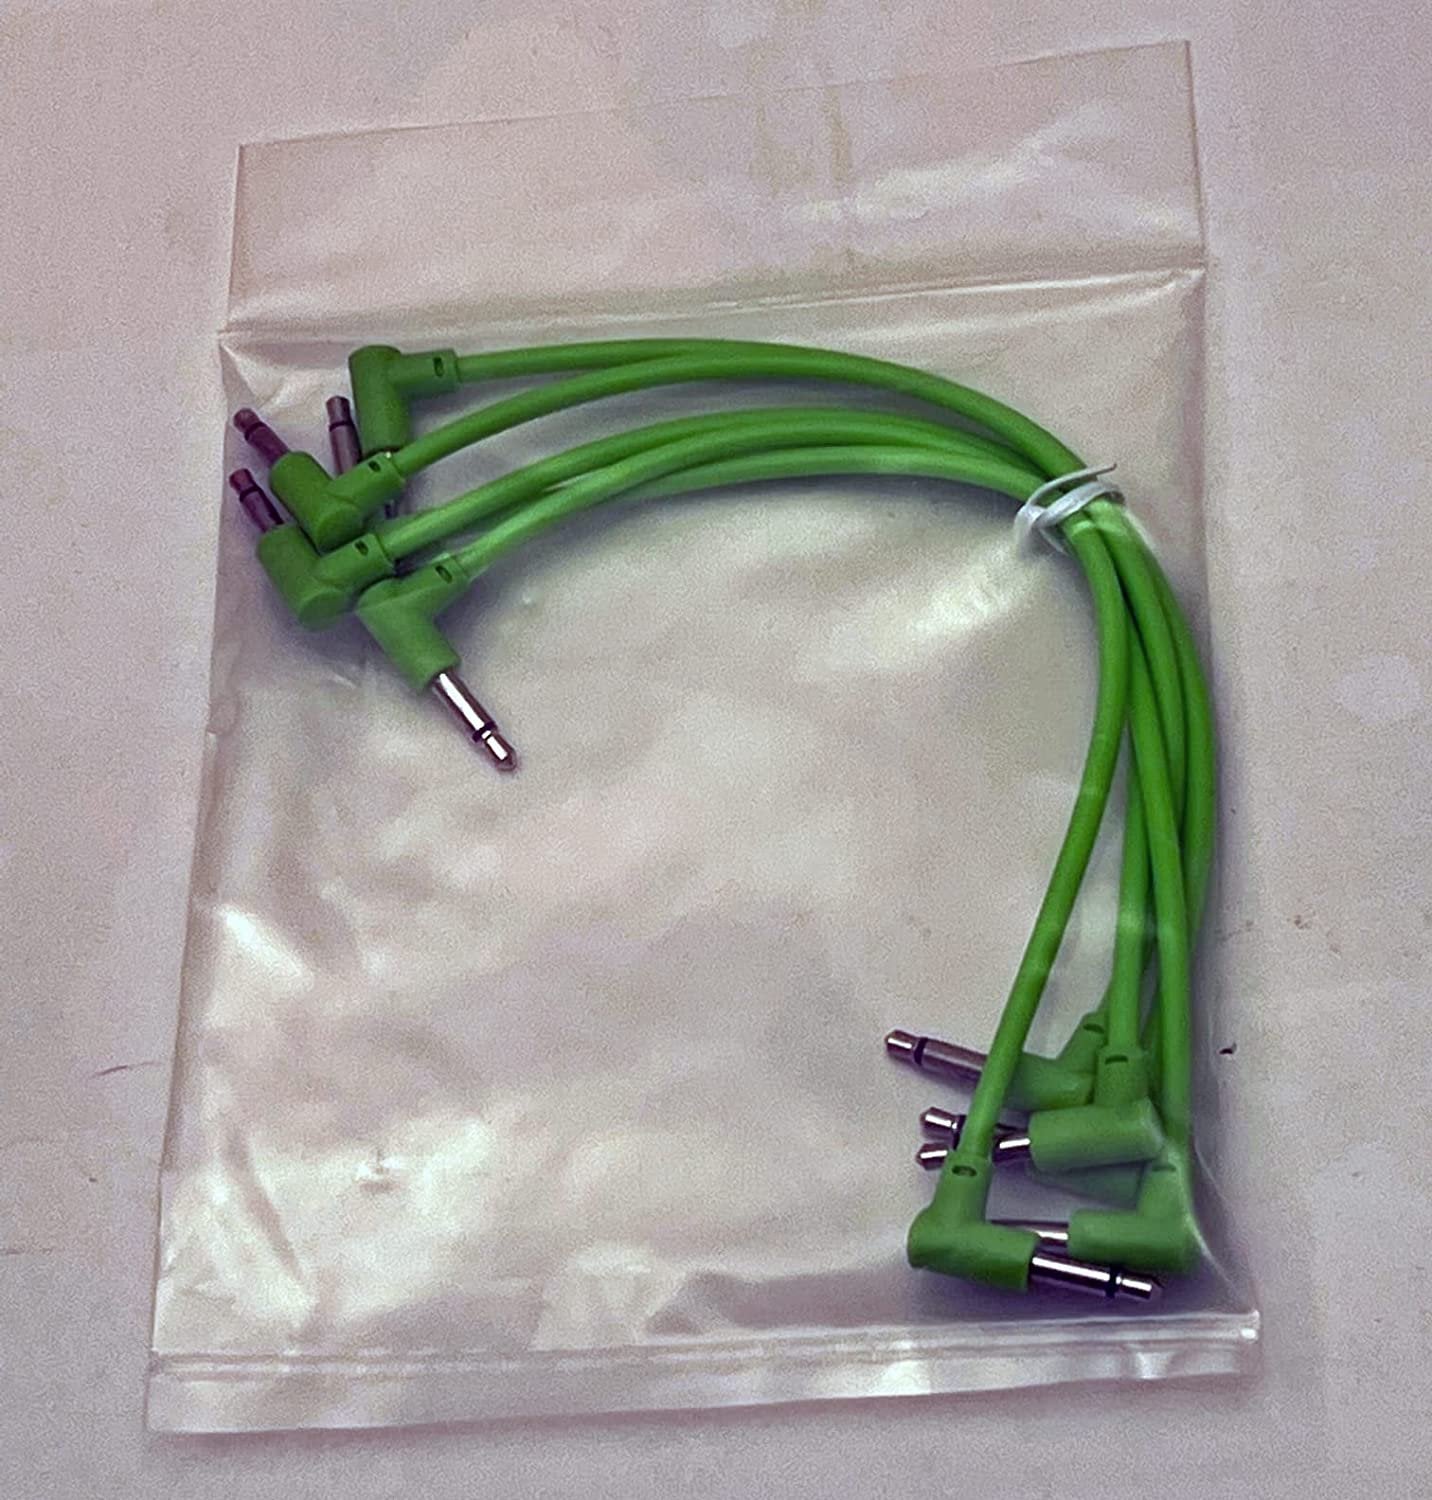 Luigis Modular M-PAR Right Angled Eurorack Patch Cables - Package of 5 Green Cables, 6" (15 cm)